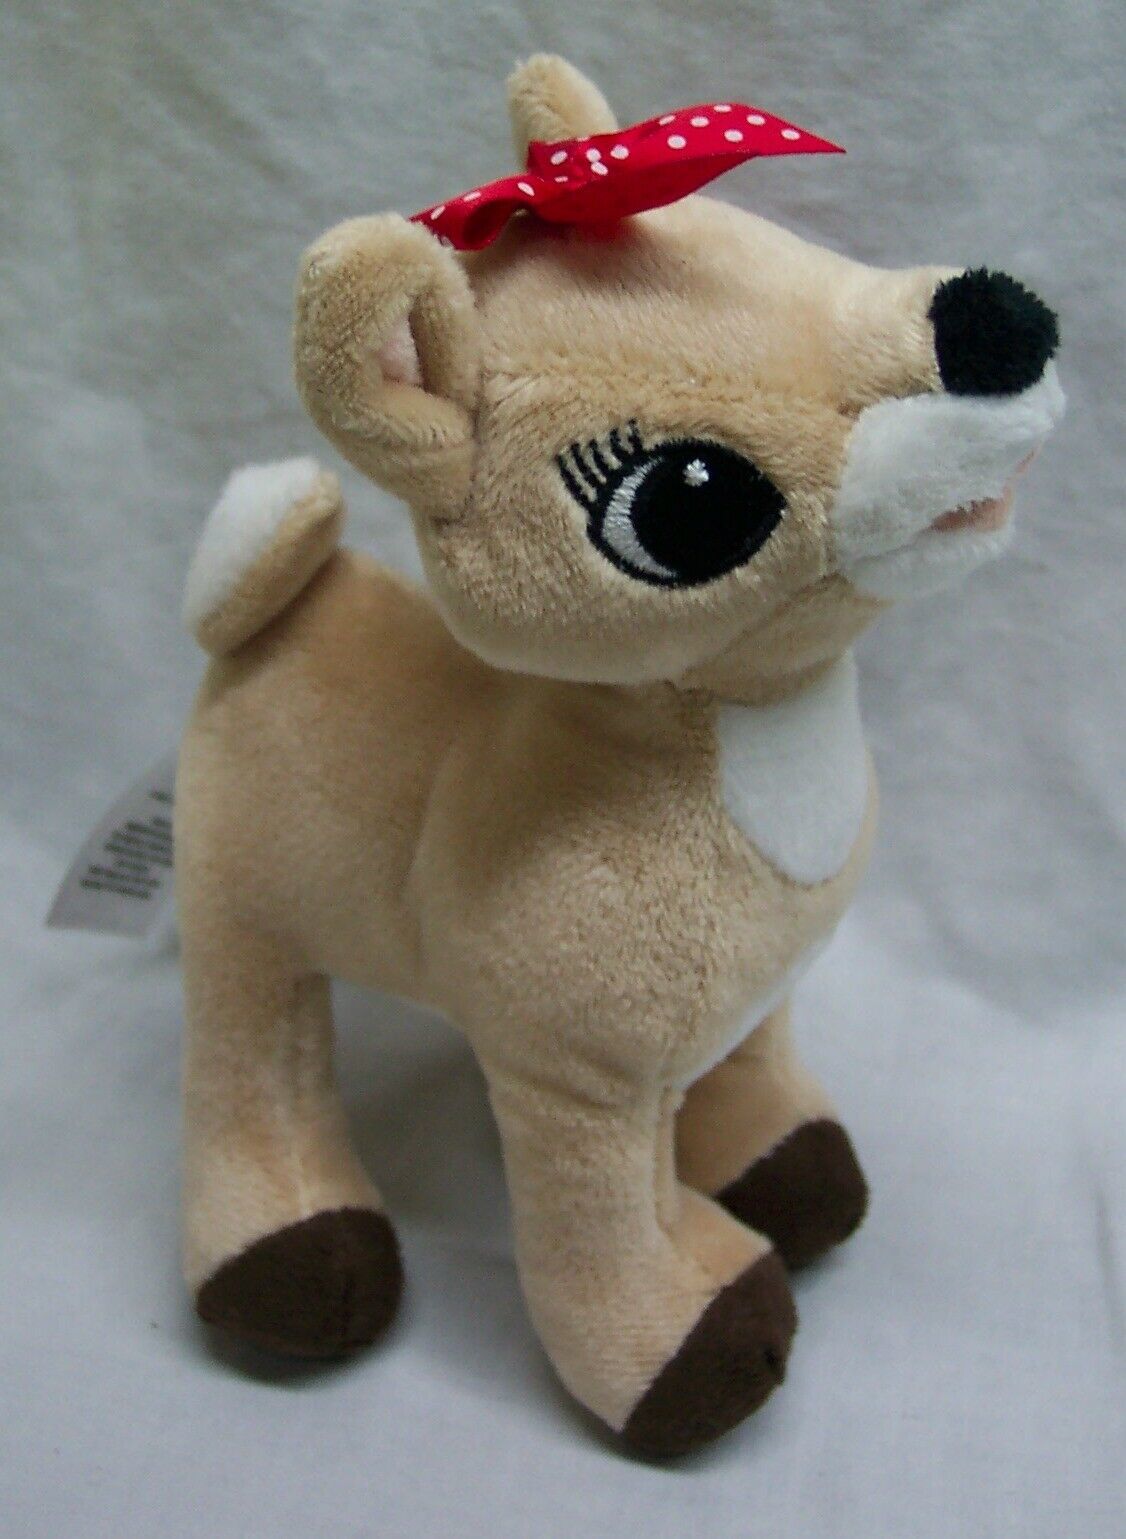 CLARICE GIRL RUDOLPH THE RED-NOSED REINDEER Plush STUFFED ANIMAL TOY ...